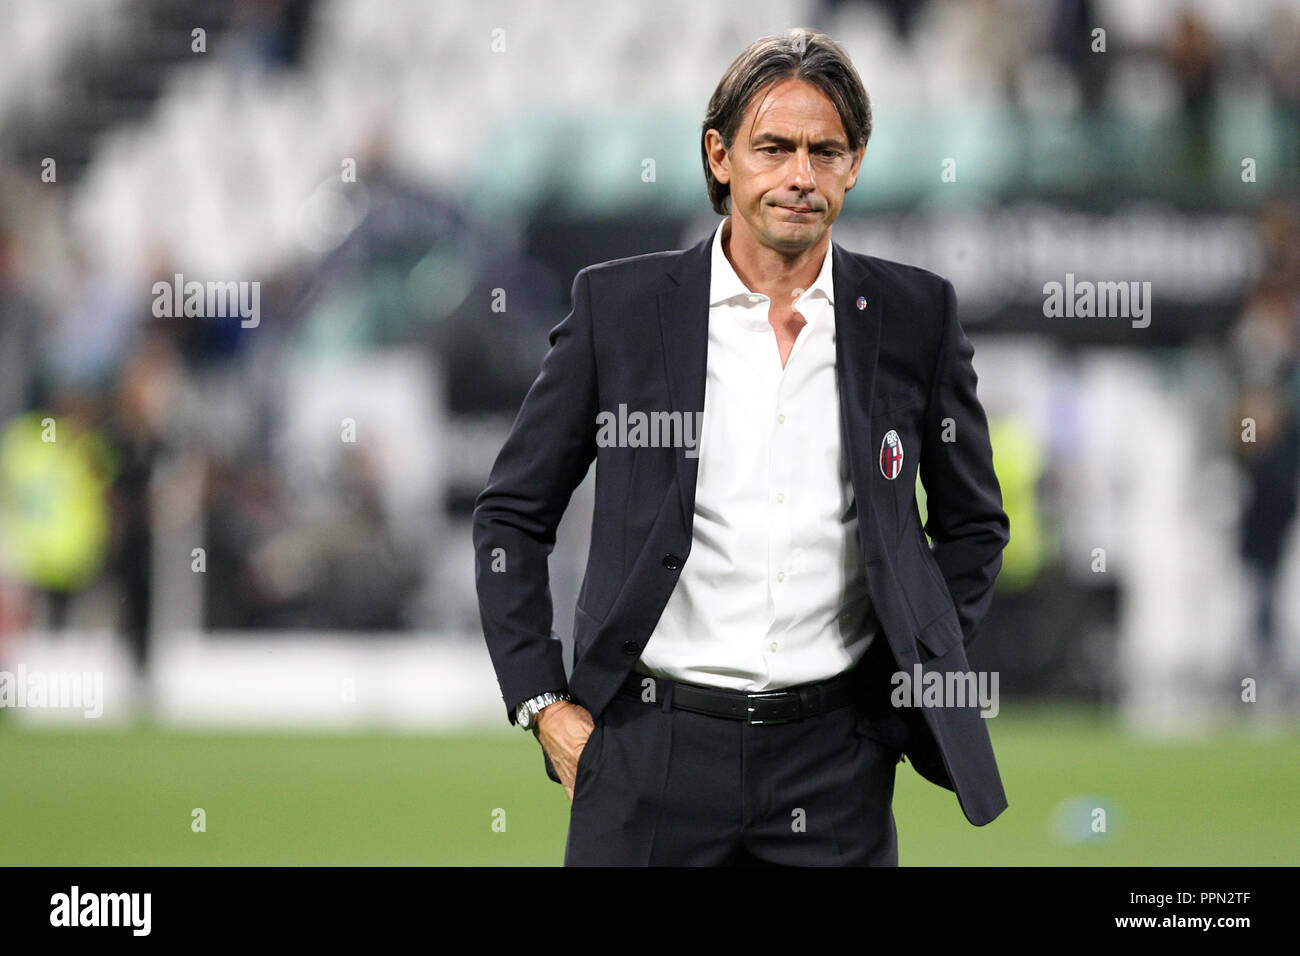 Torino, Italy. 26th September 2018. Filippo Inzaghi, head coach of Bologna Fc, looks on before the Serie A football match between Juventus Fc and Bologna Fc. Credit: Marco Canoniero/Alamy Live News Stock Photo